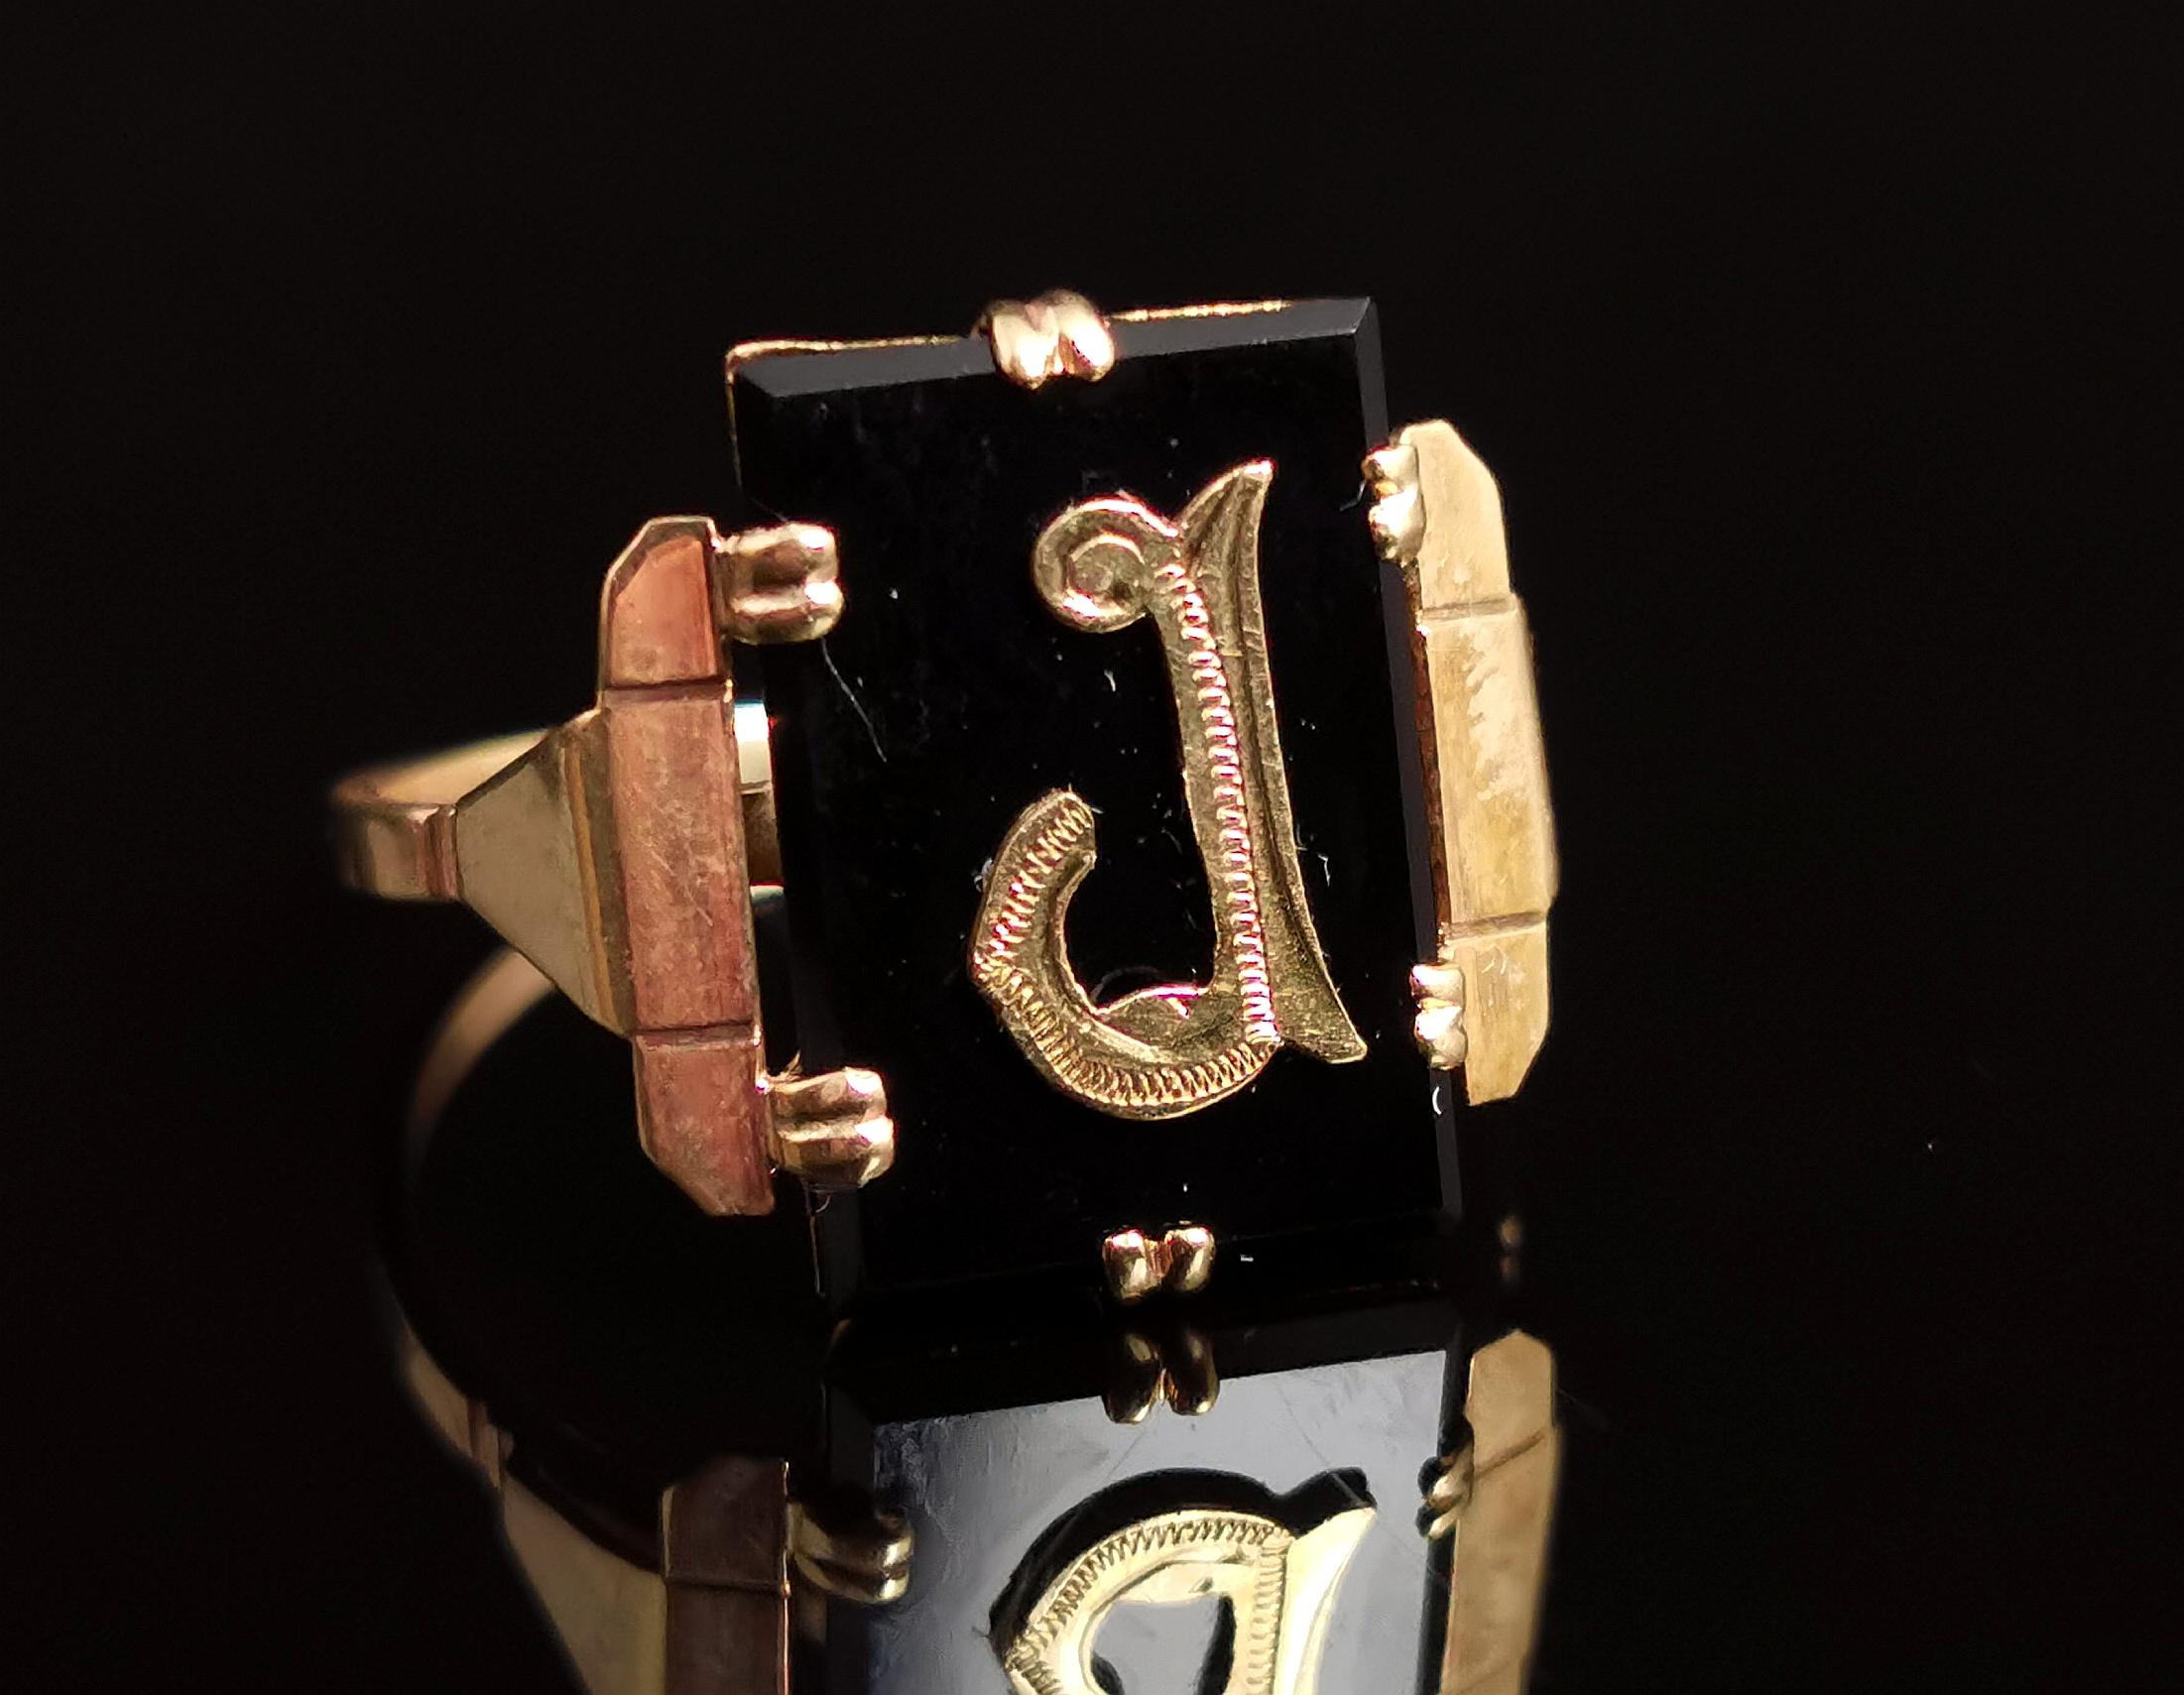 A gorgeous antique, Art Deco era mourning ring.

This is an initial ring with an applied gold letter J, set on a rich black onyx panel.

The ring has decorative stepped shoulders and a slender smooth polished band.

This style was popular towards